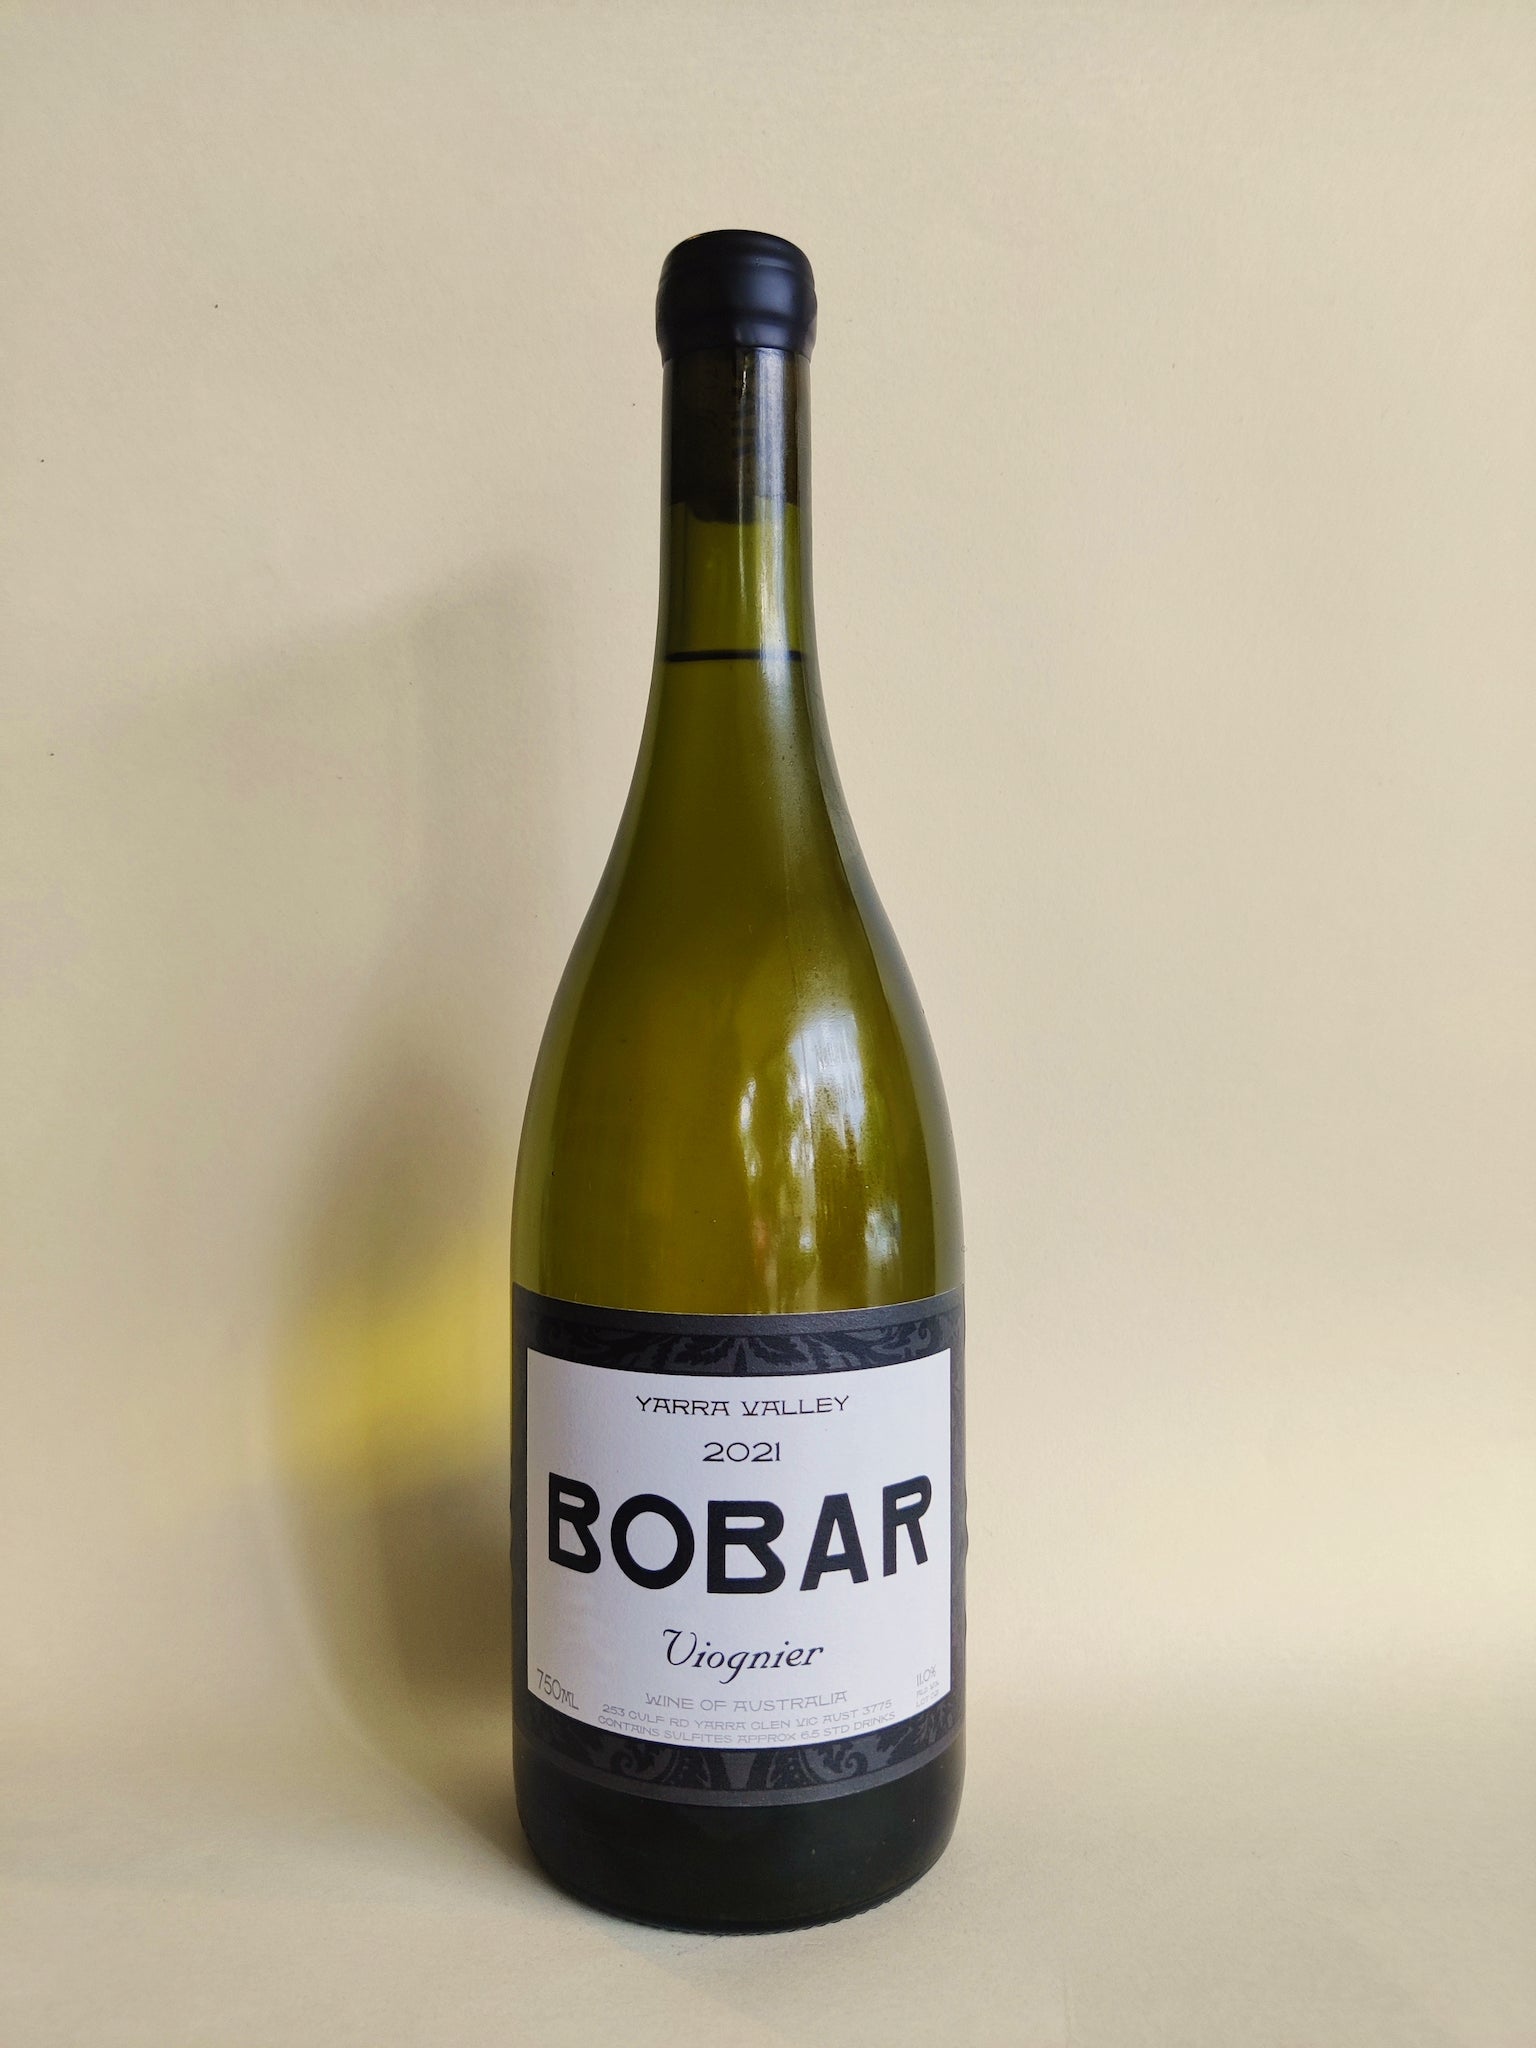 A bottle of Bobar Viognier from the Yarra Valley, Victoria.